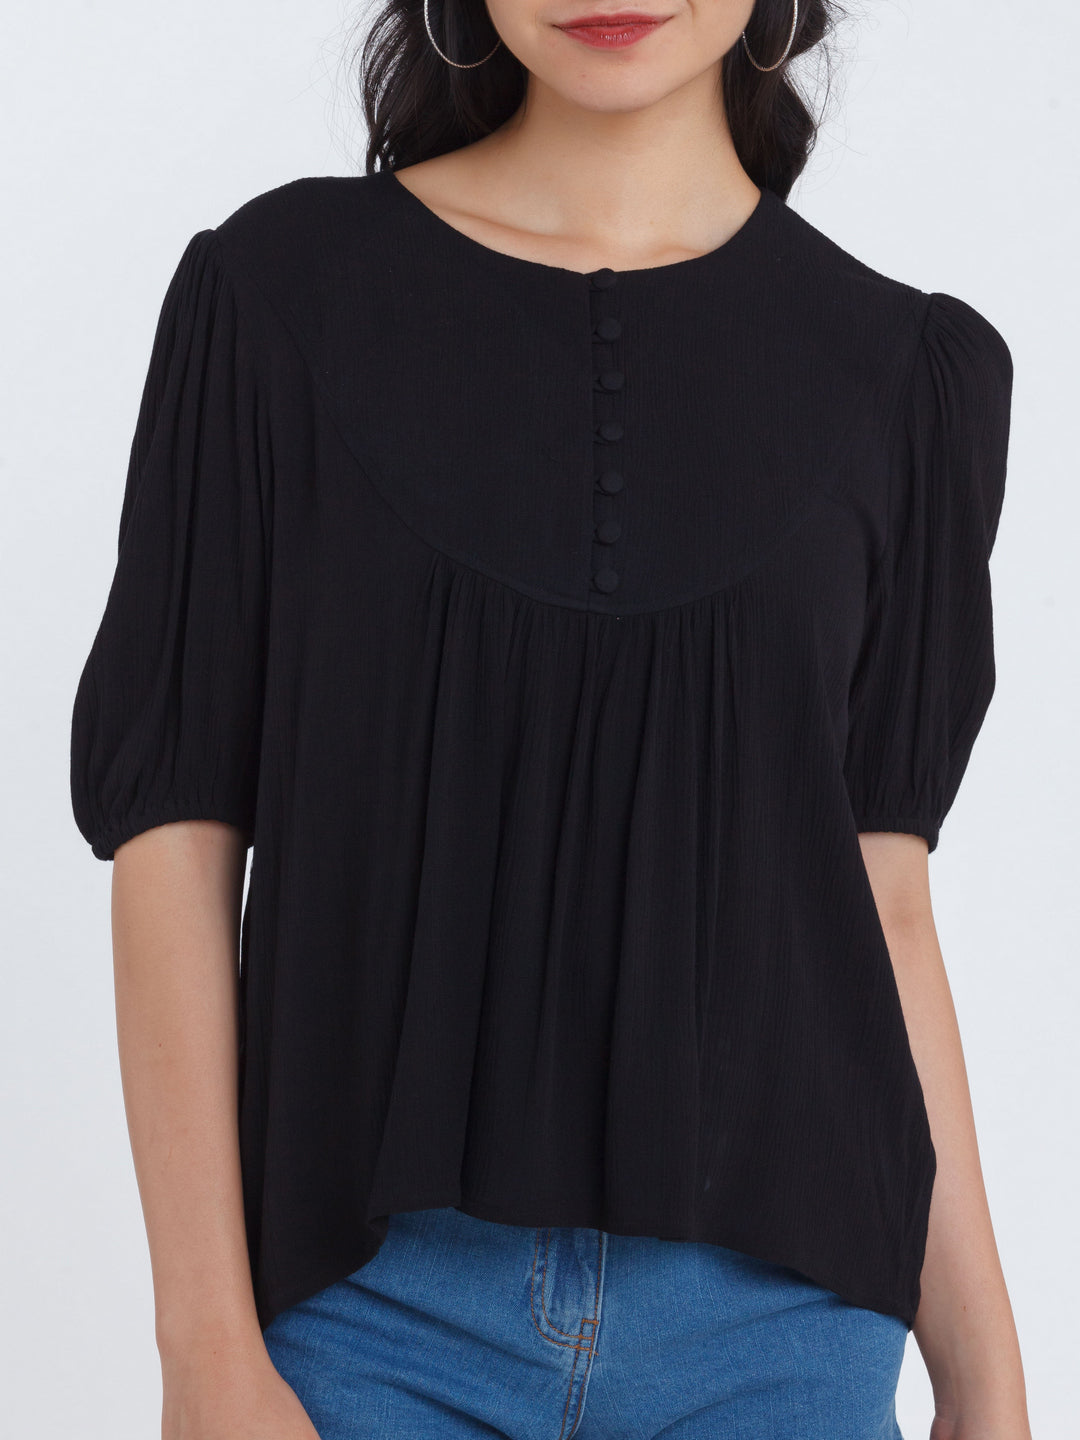 Black Solid Gathered Top For Women